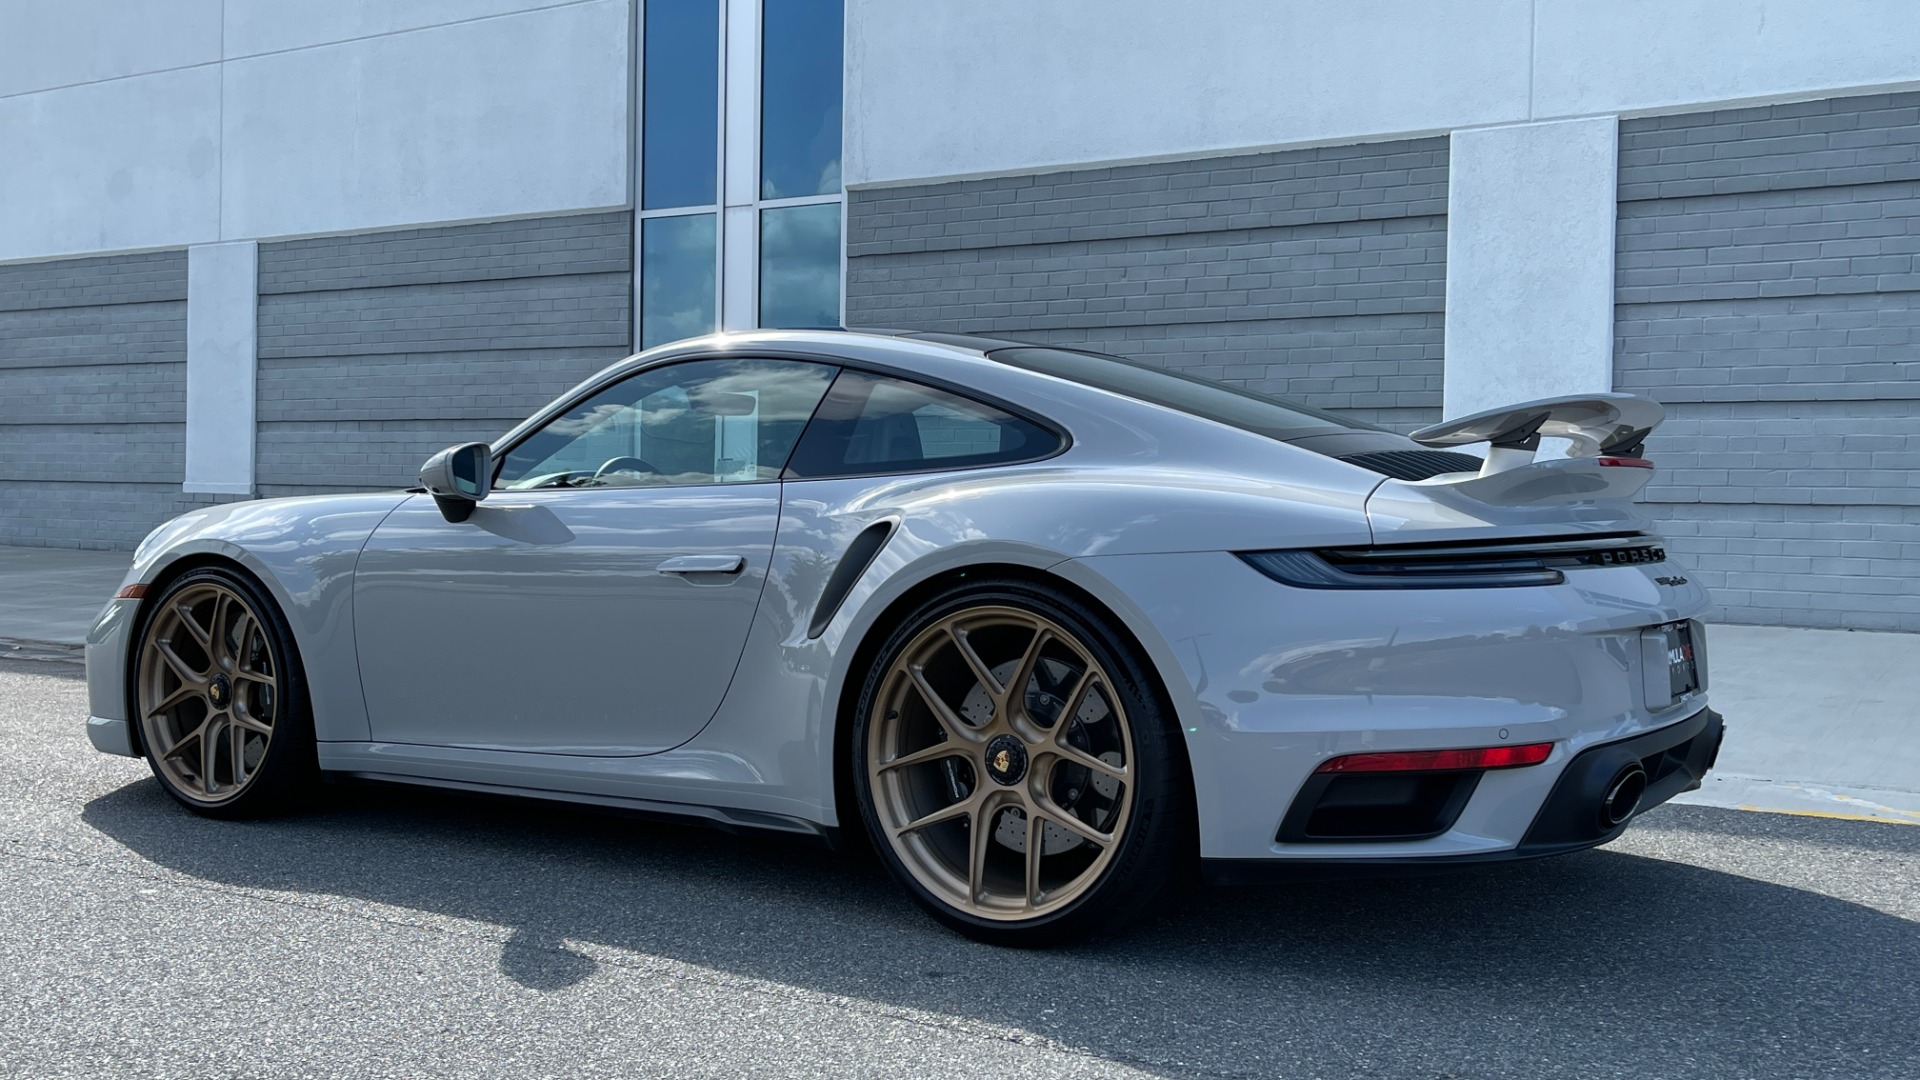 Used 2021 Porsche 911 Turbo S / HRE WHEELS / FRONT LIFT / MATRIX LIGHTS / PASM SUSPENSION for sale $299,000 at Formula Imports in Charlotte NC 28227 10